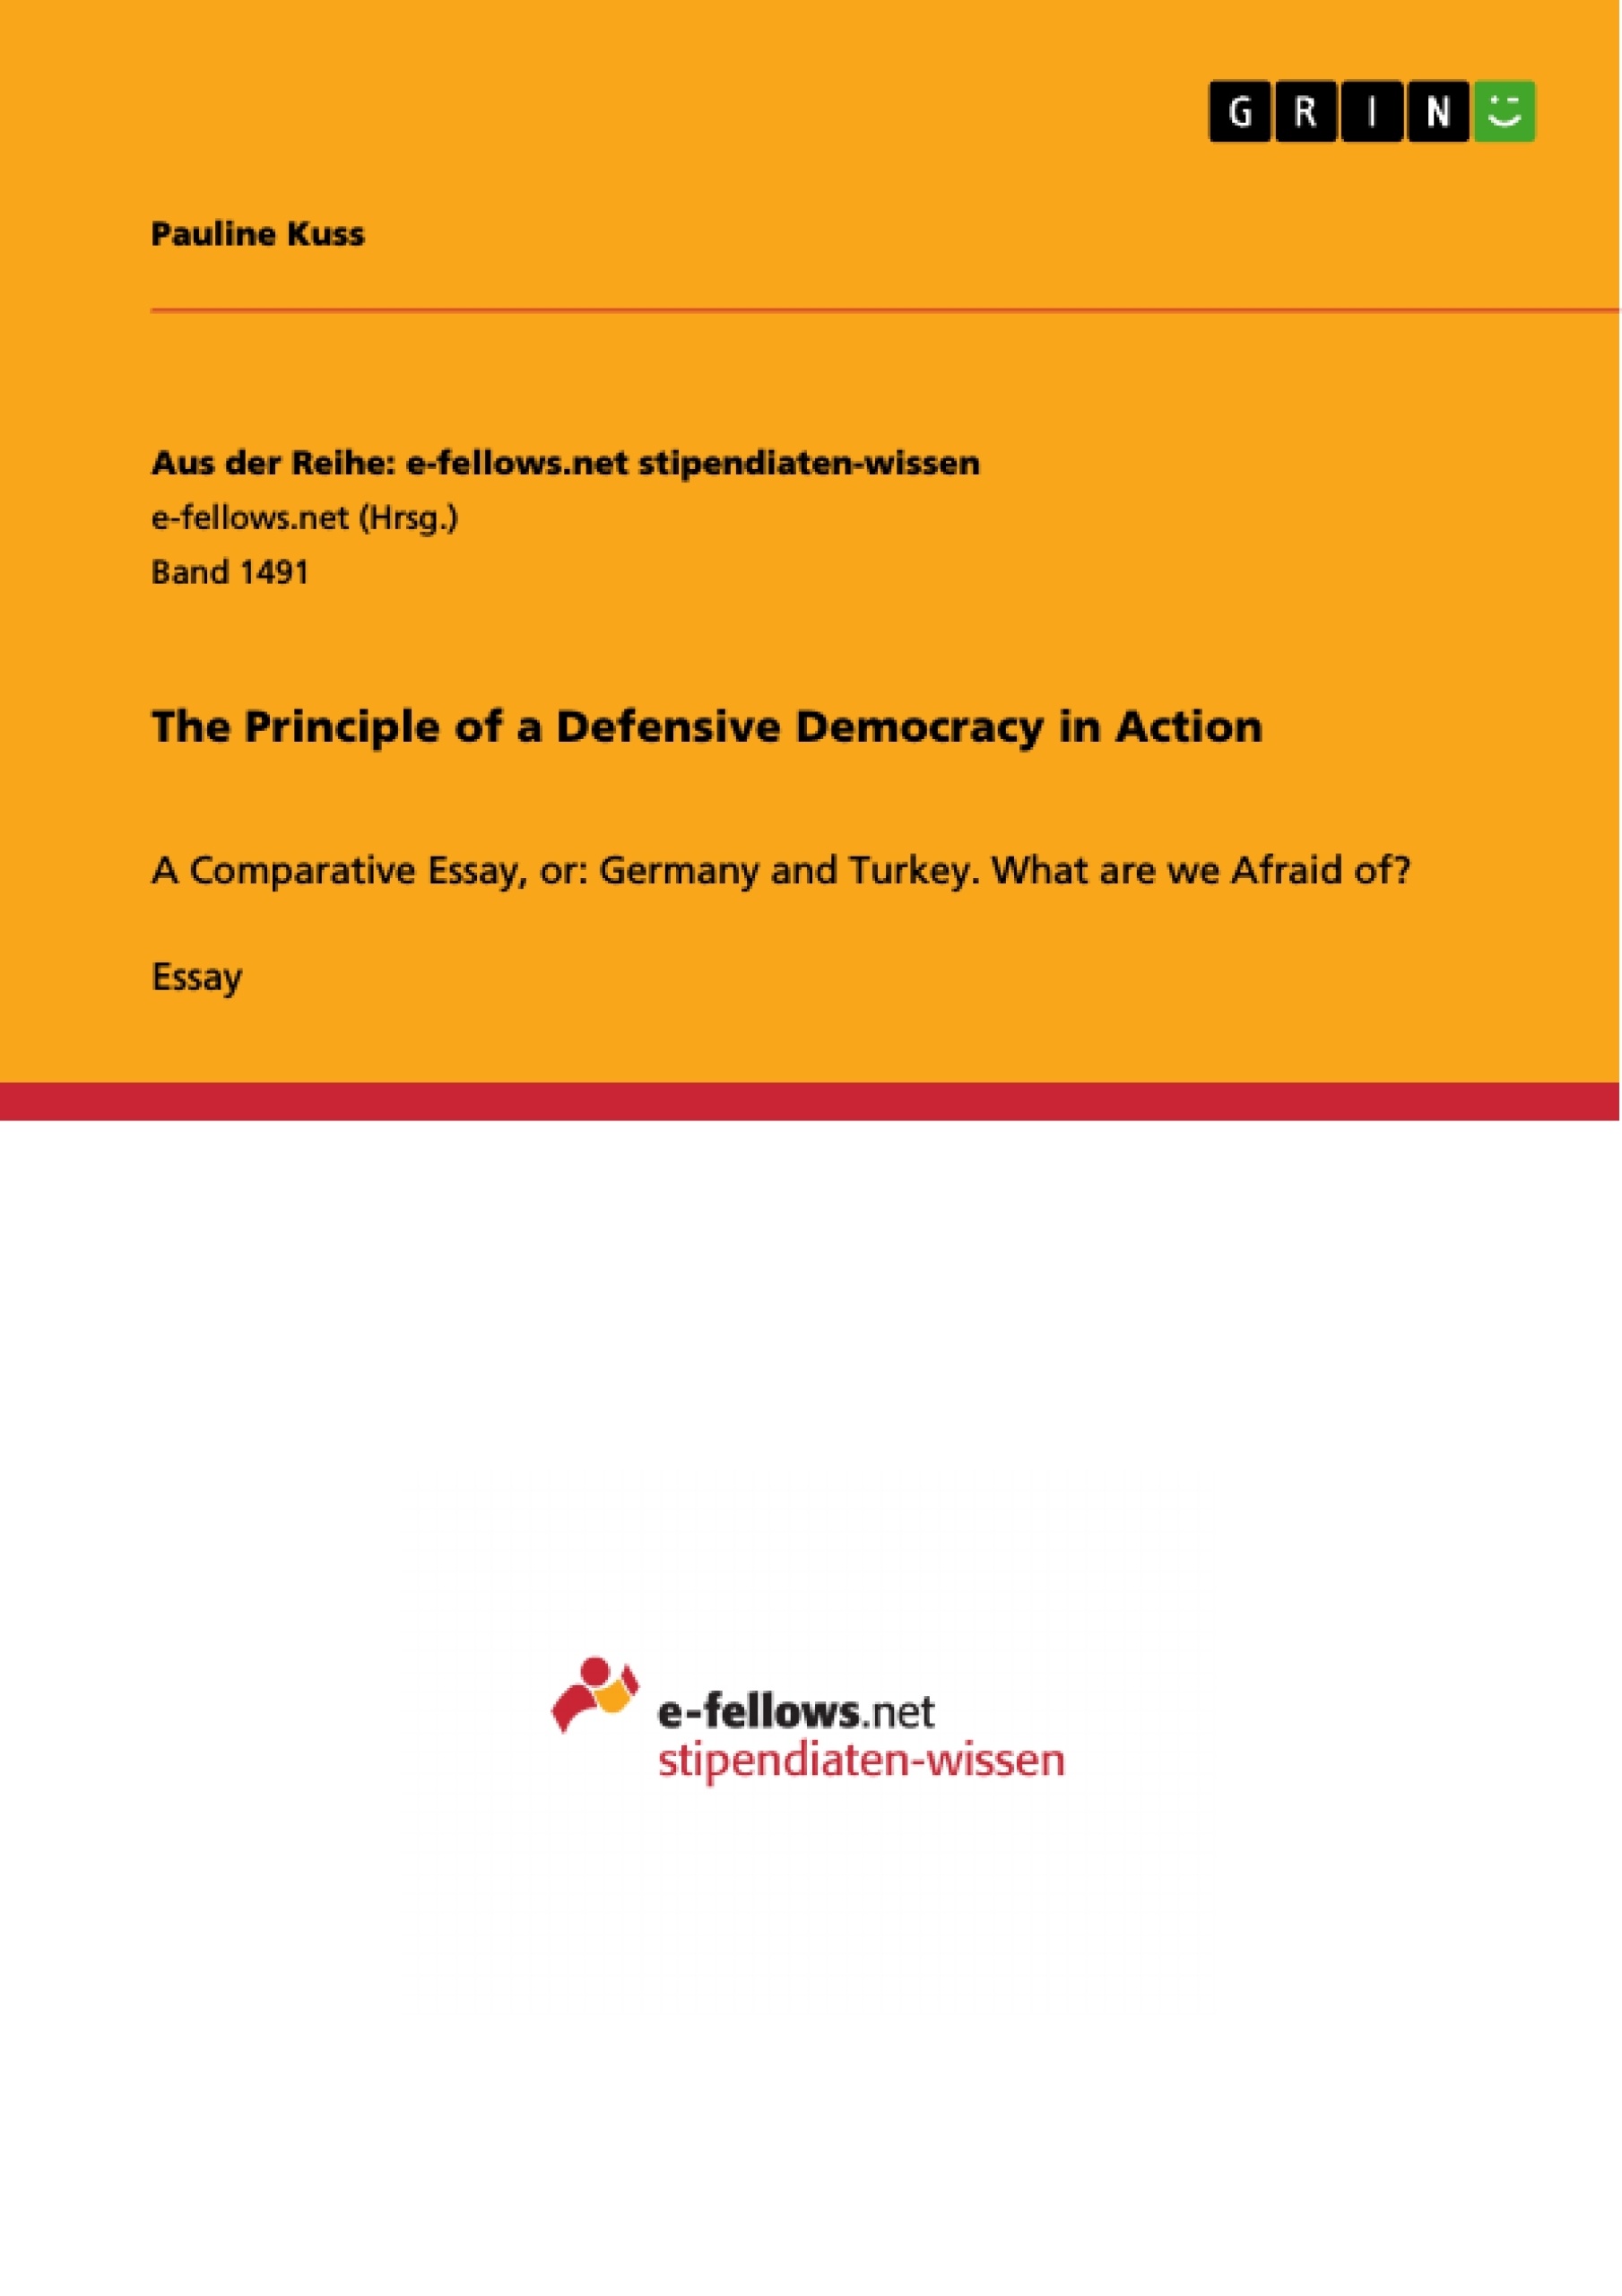 Title: The Principle of a Defensive Democracy in Action